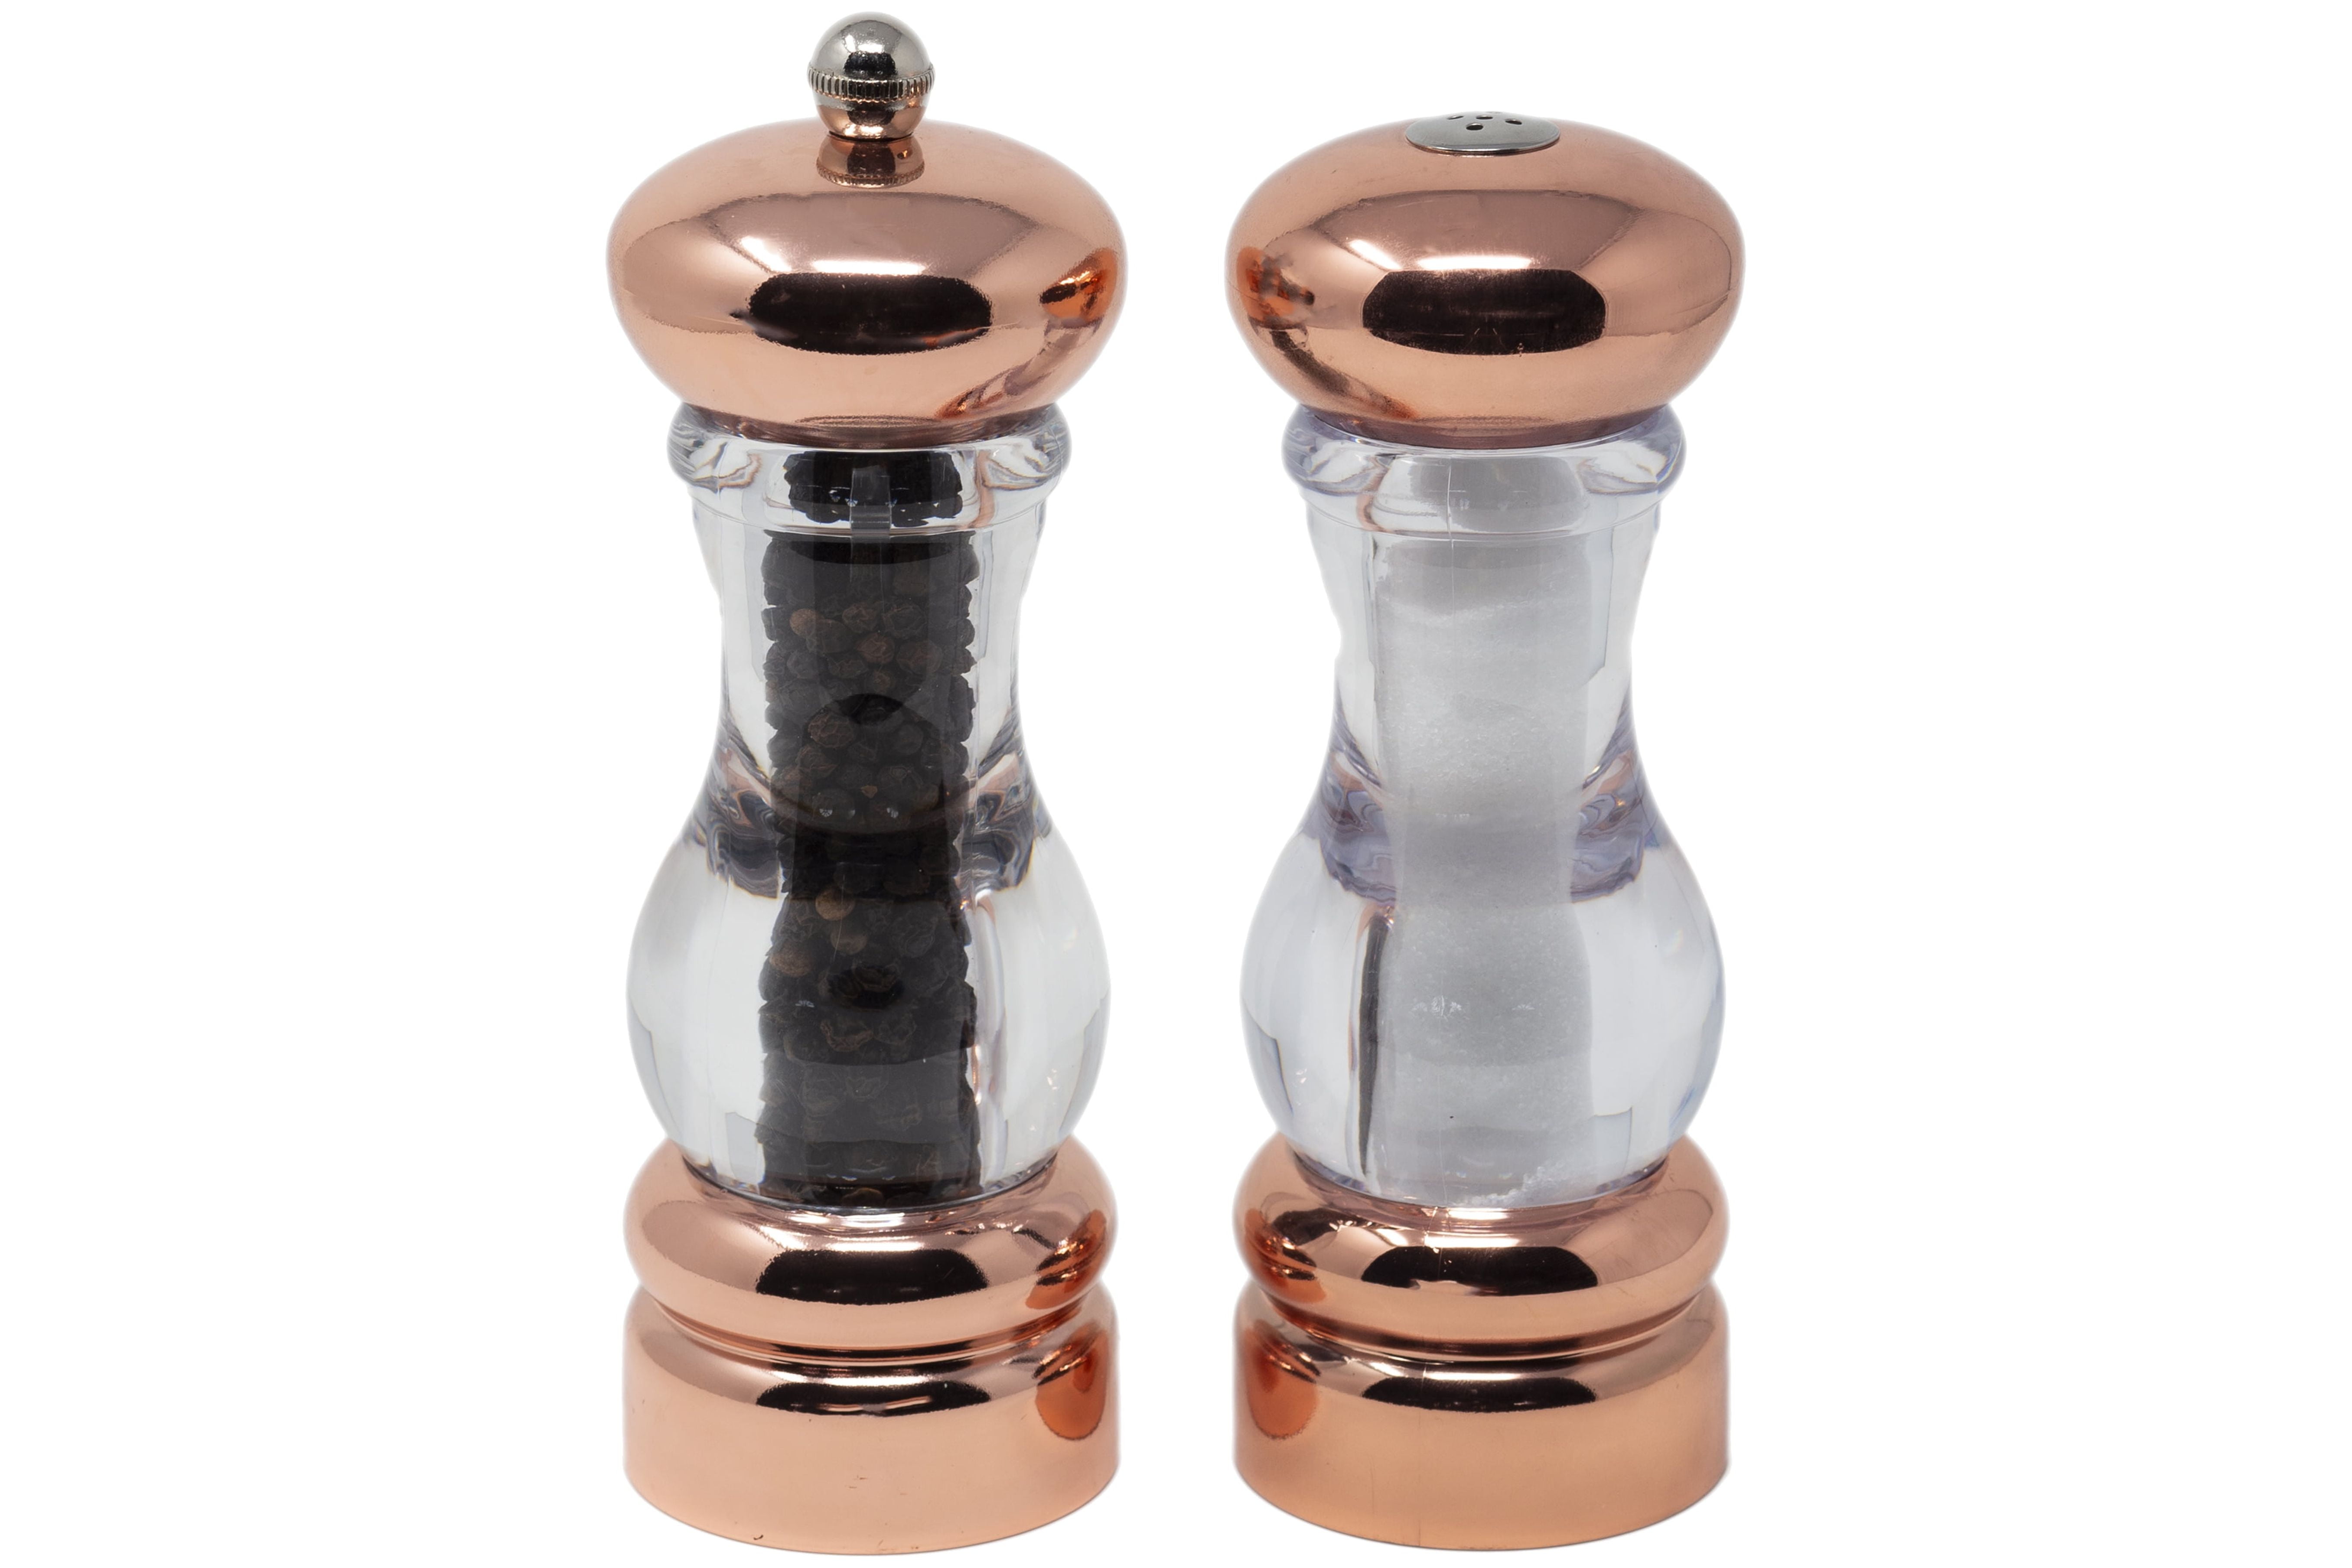 Federal Salt & Pepper Mills and Shakers - Liberty Tabletop - Made in America